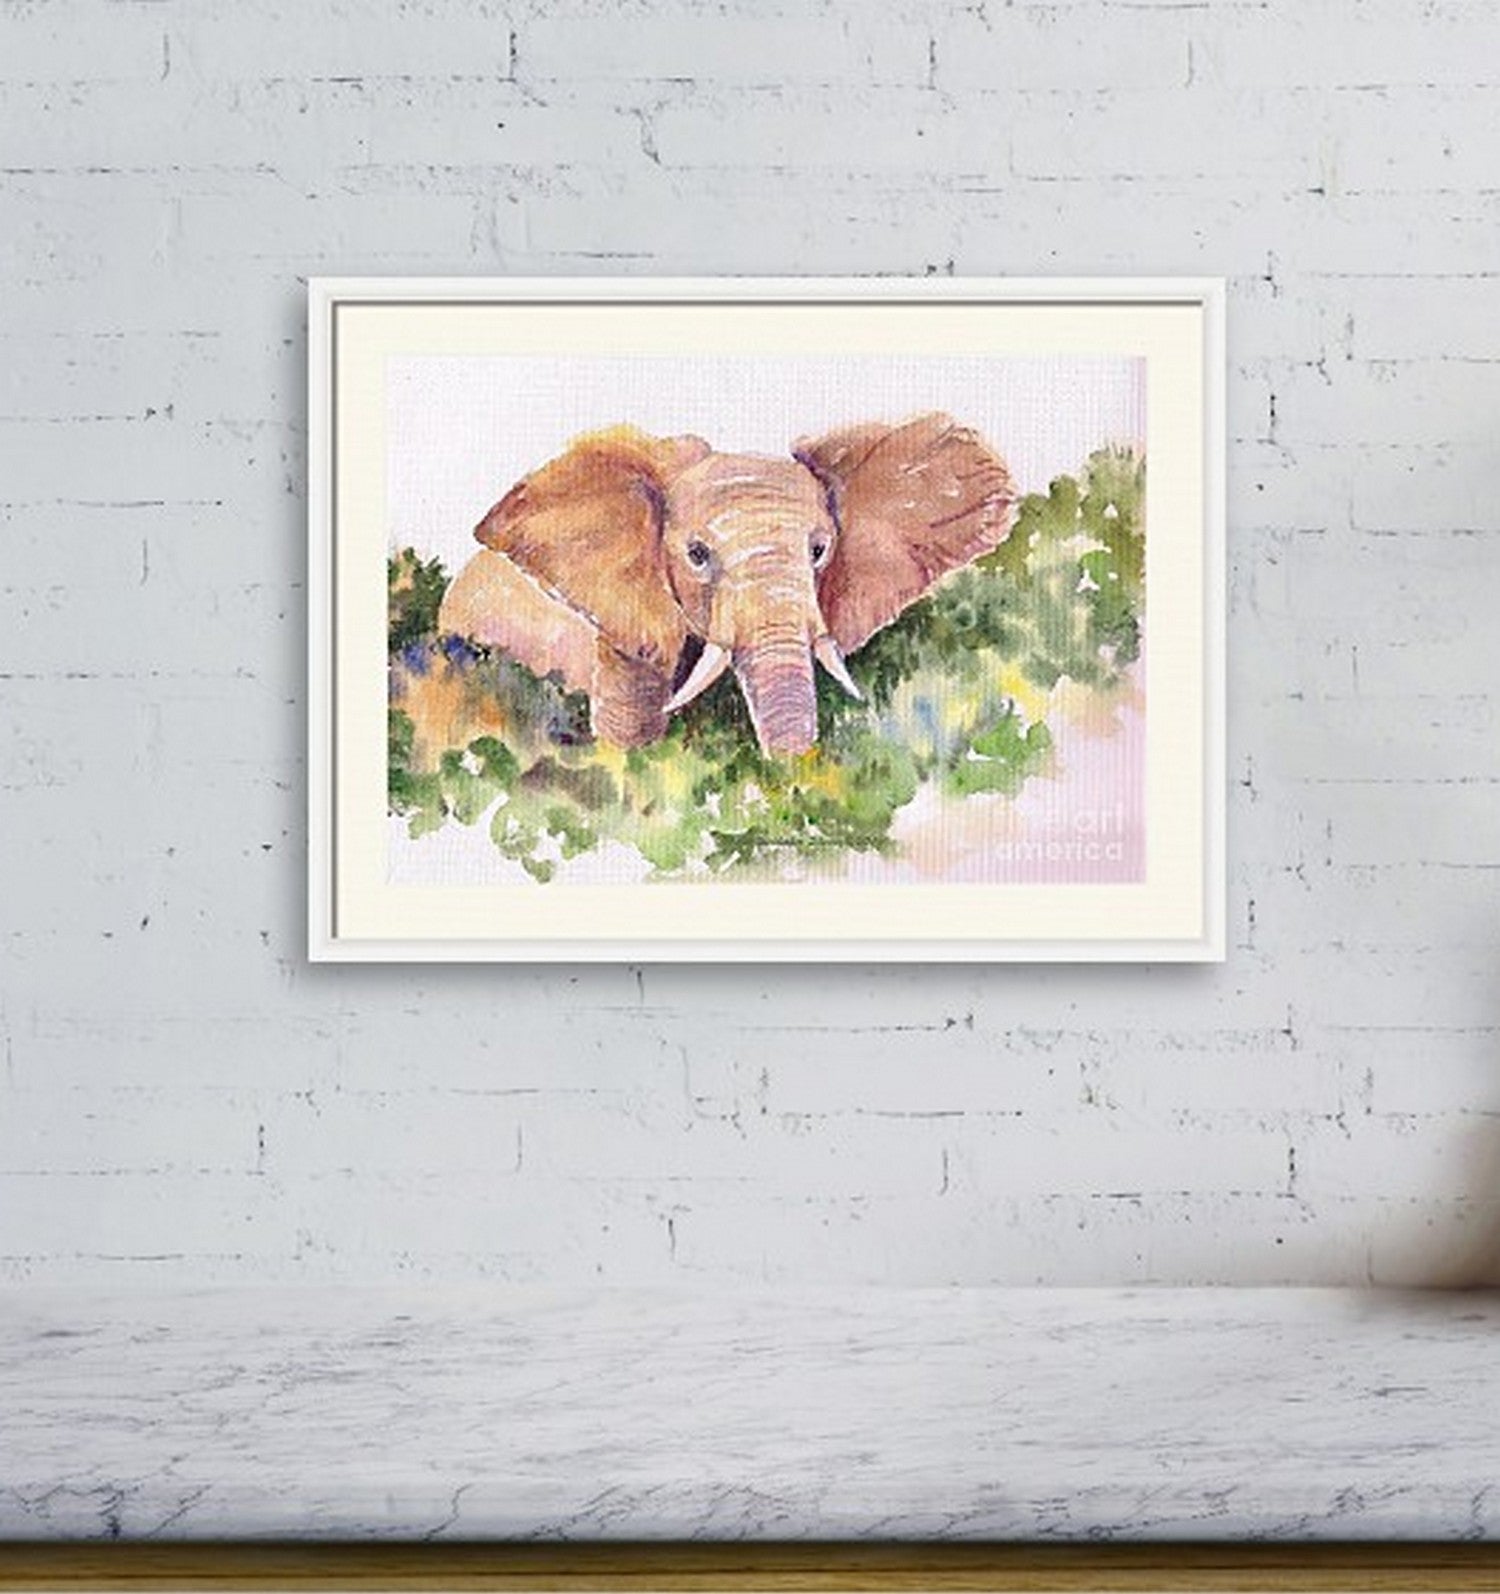 African elephant watercolor painting wall view  in a virtual frame